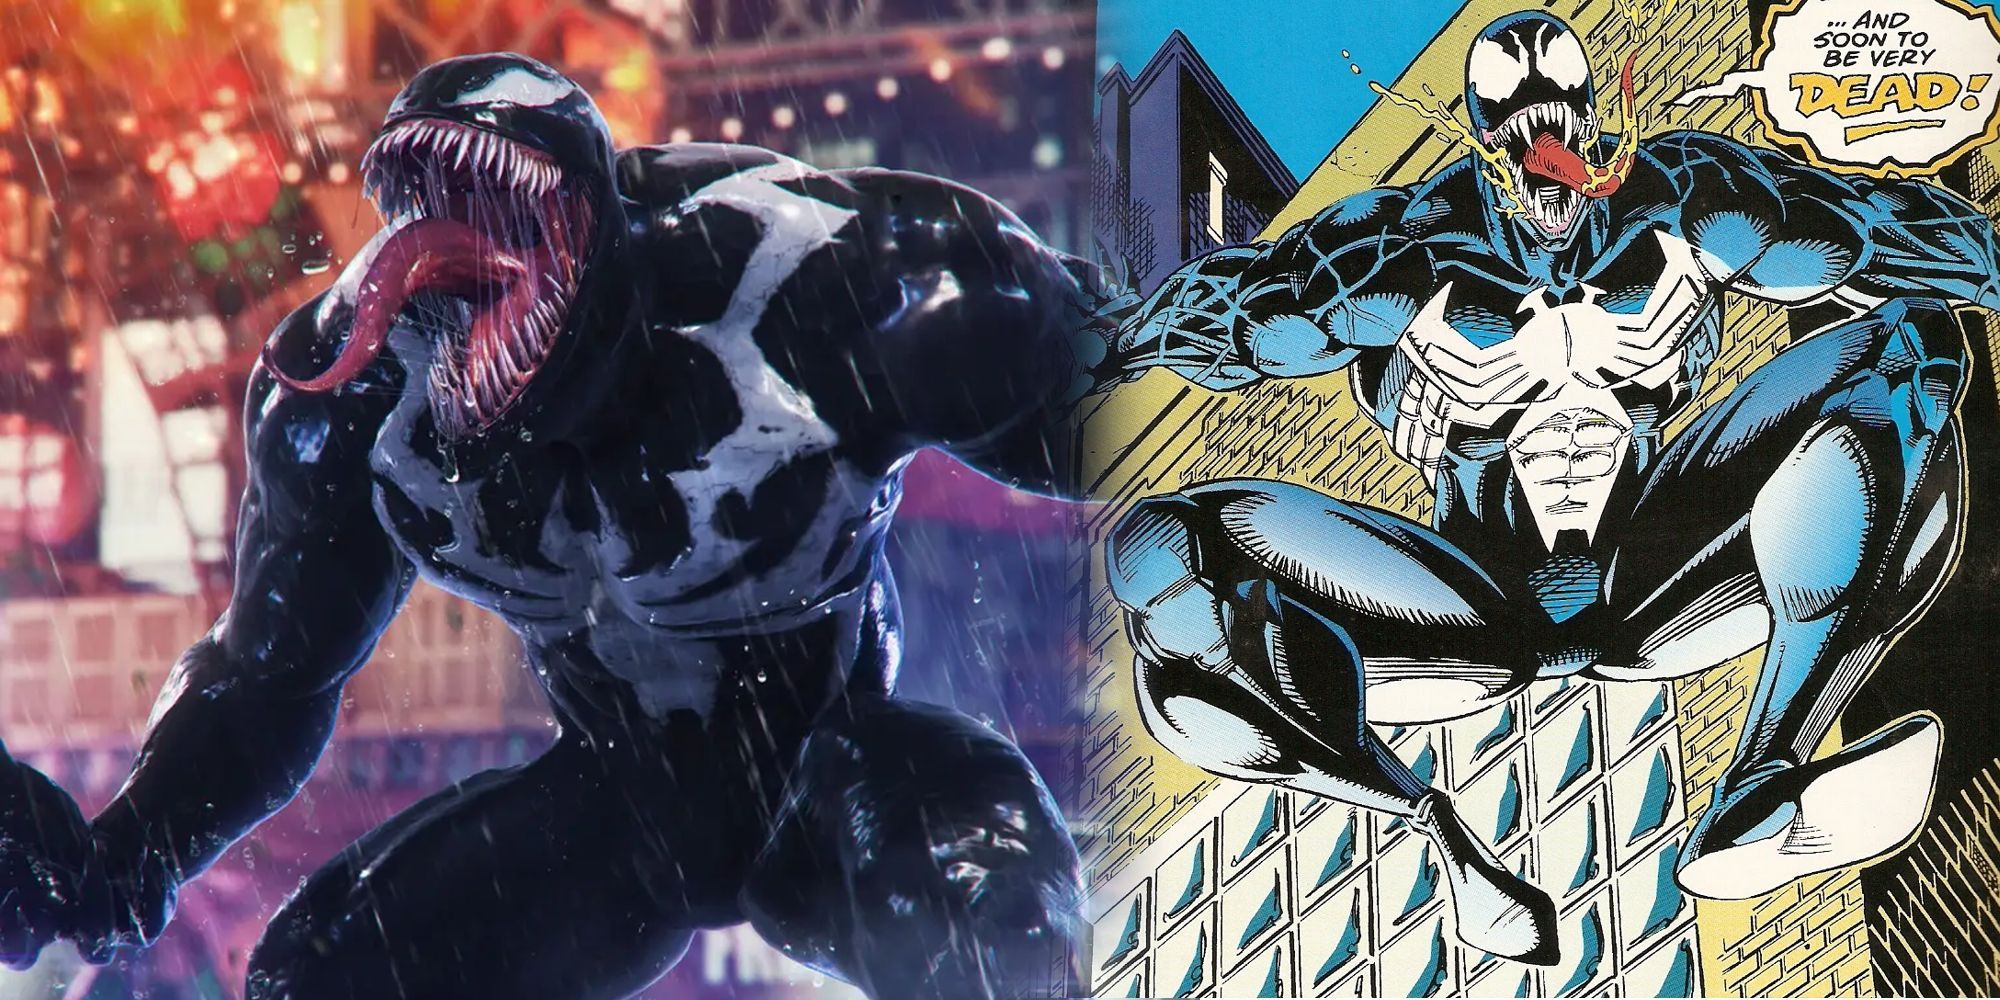 A STATUE OF PETER, MILES AND VENOM!?